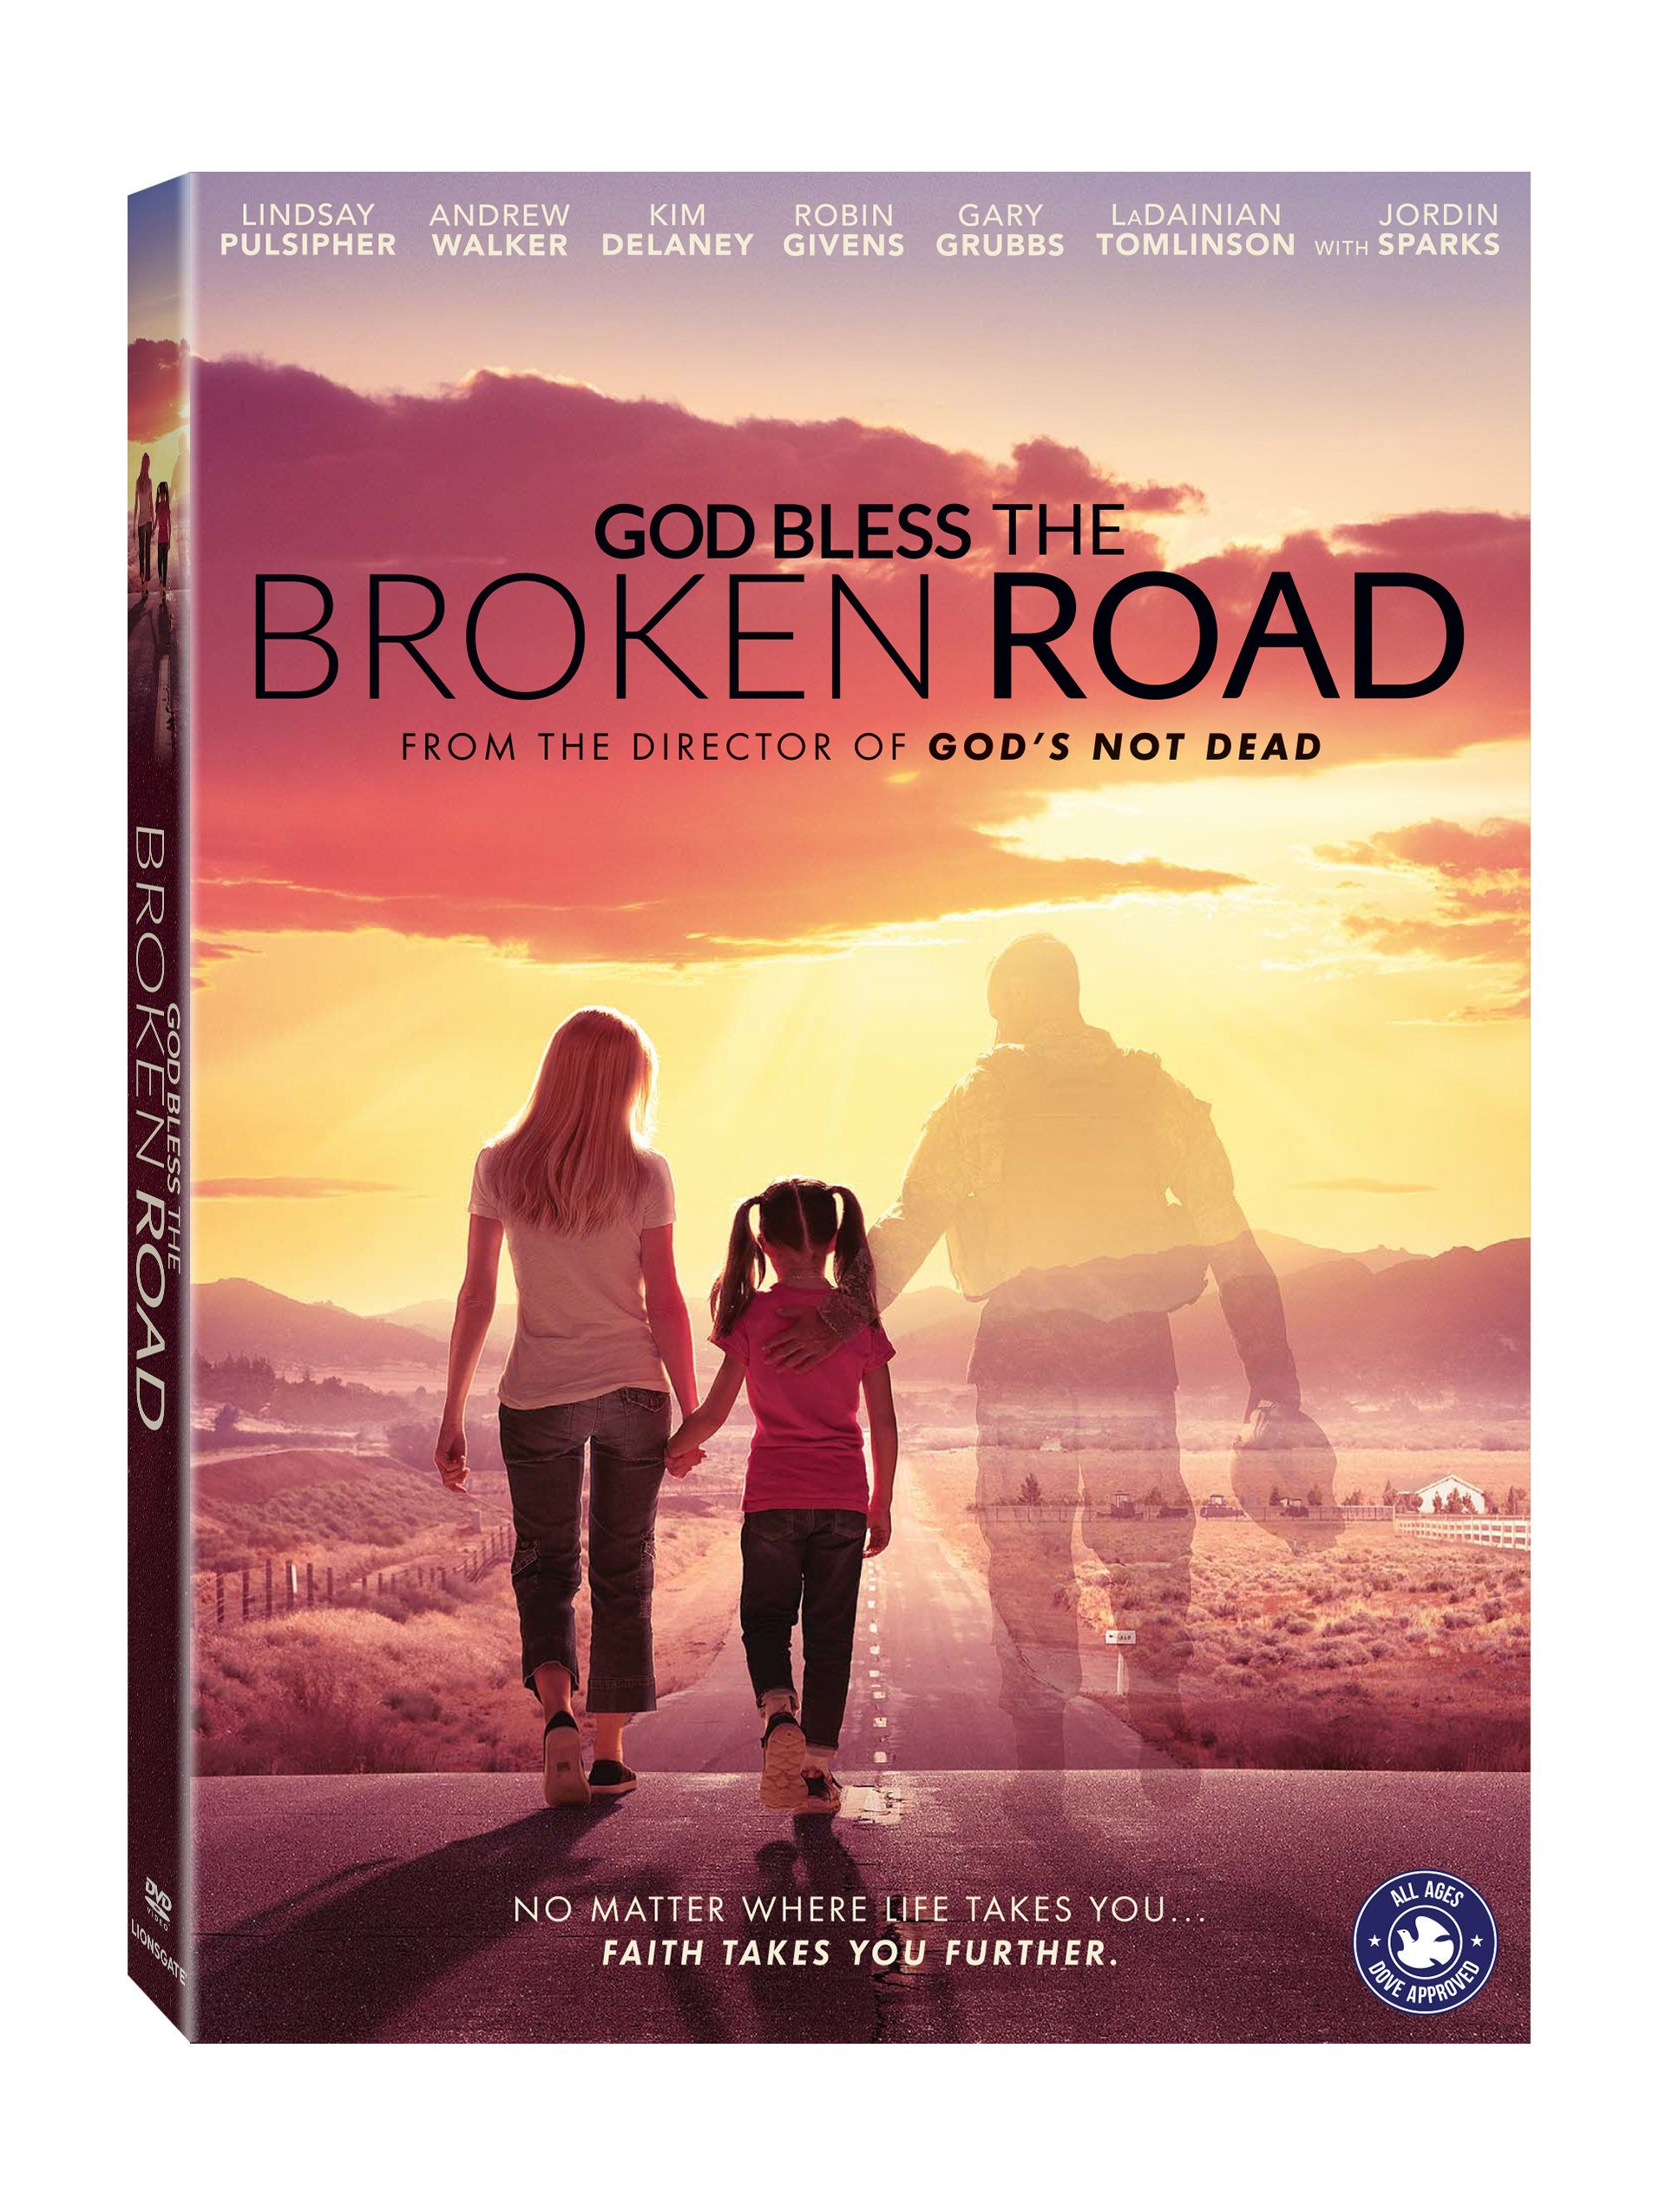 God Bless The Broken Road DVD cover (Lionsgate Home Entertainment)